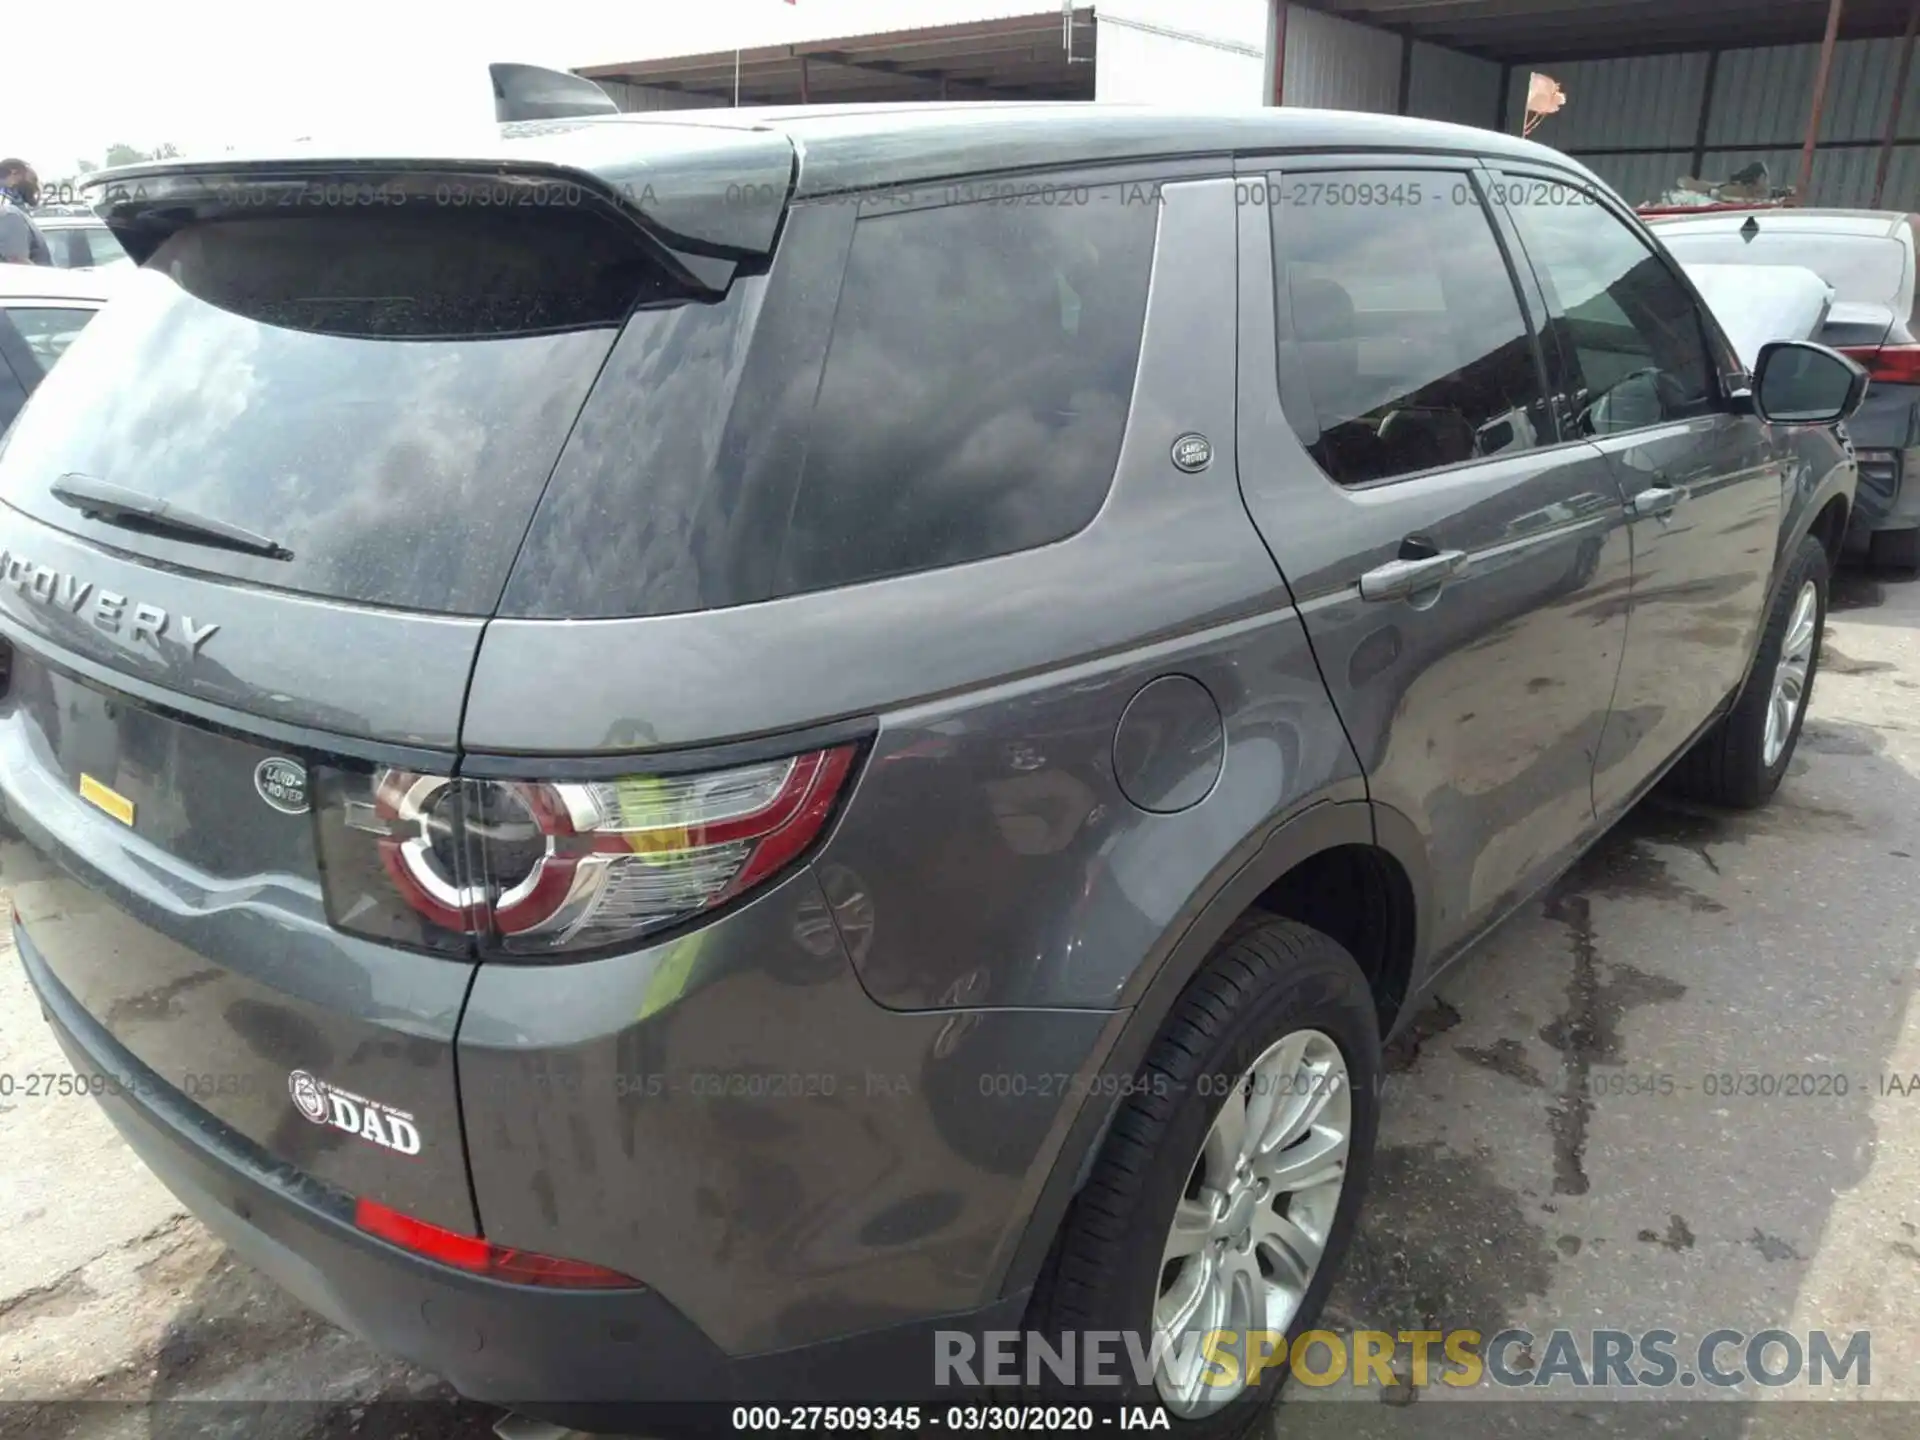 4 Photograph of a damaged car SALCP2FX9KH785673 LAND ROVER DISCOVERY SPORT 2019